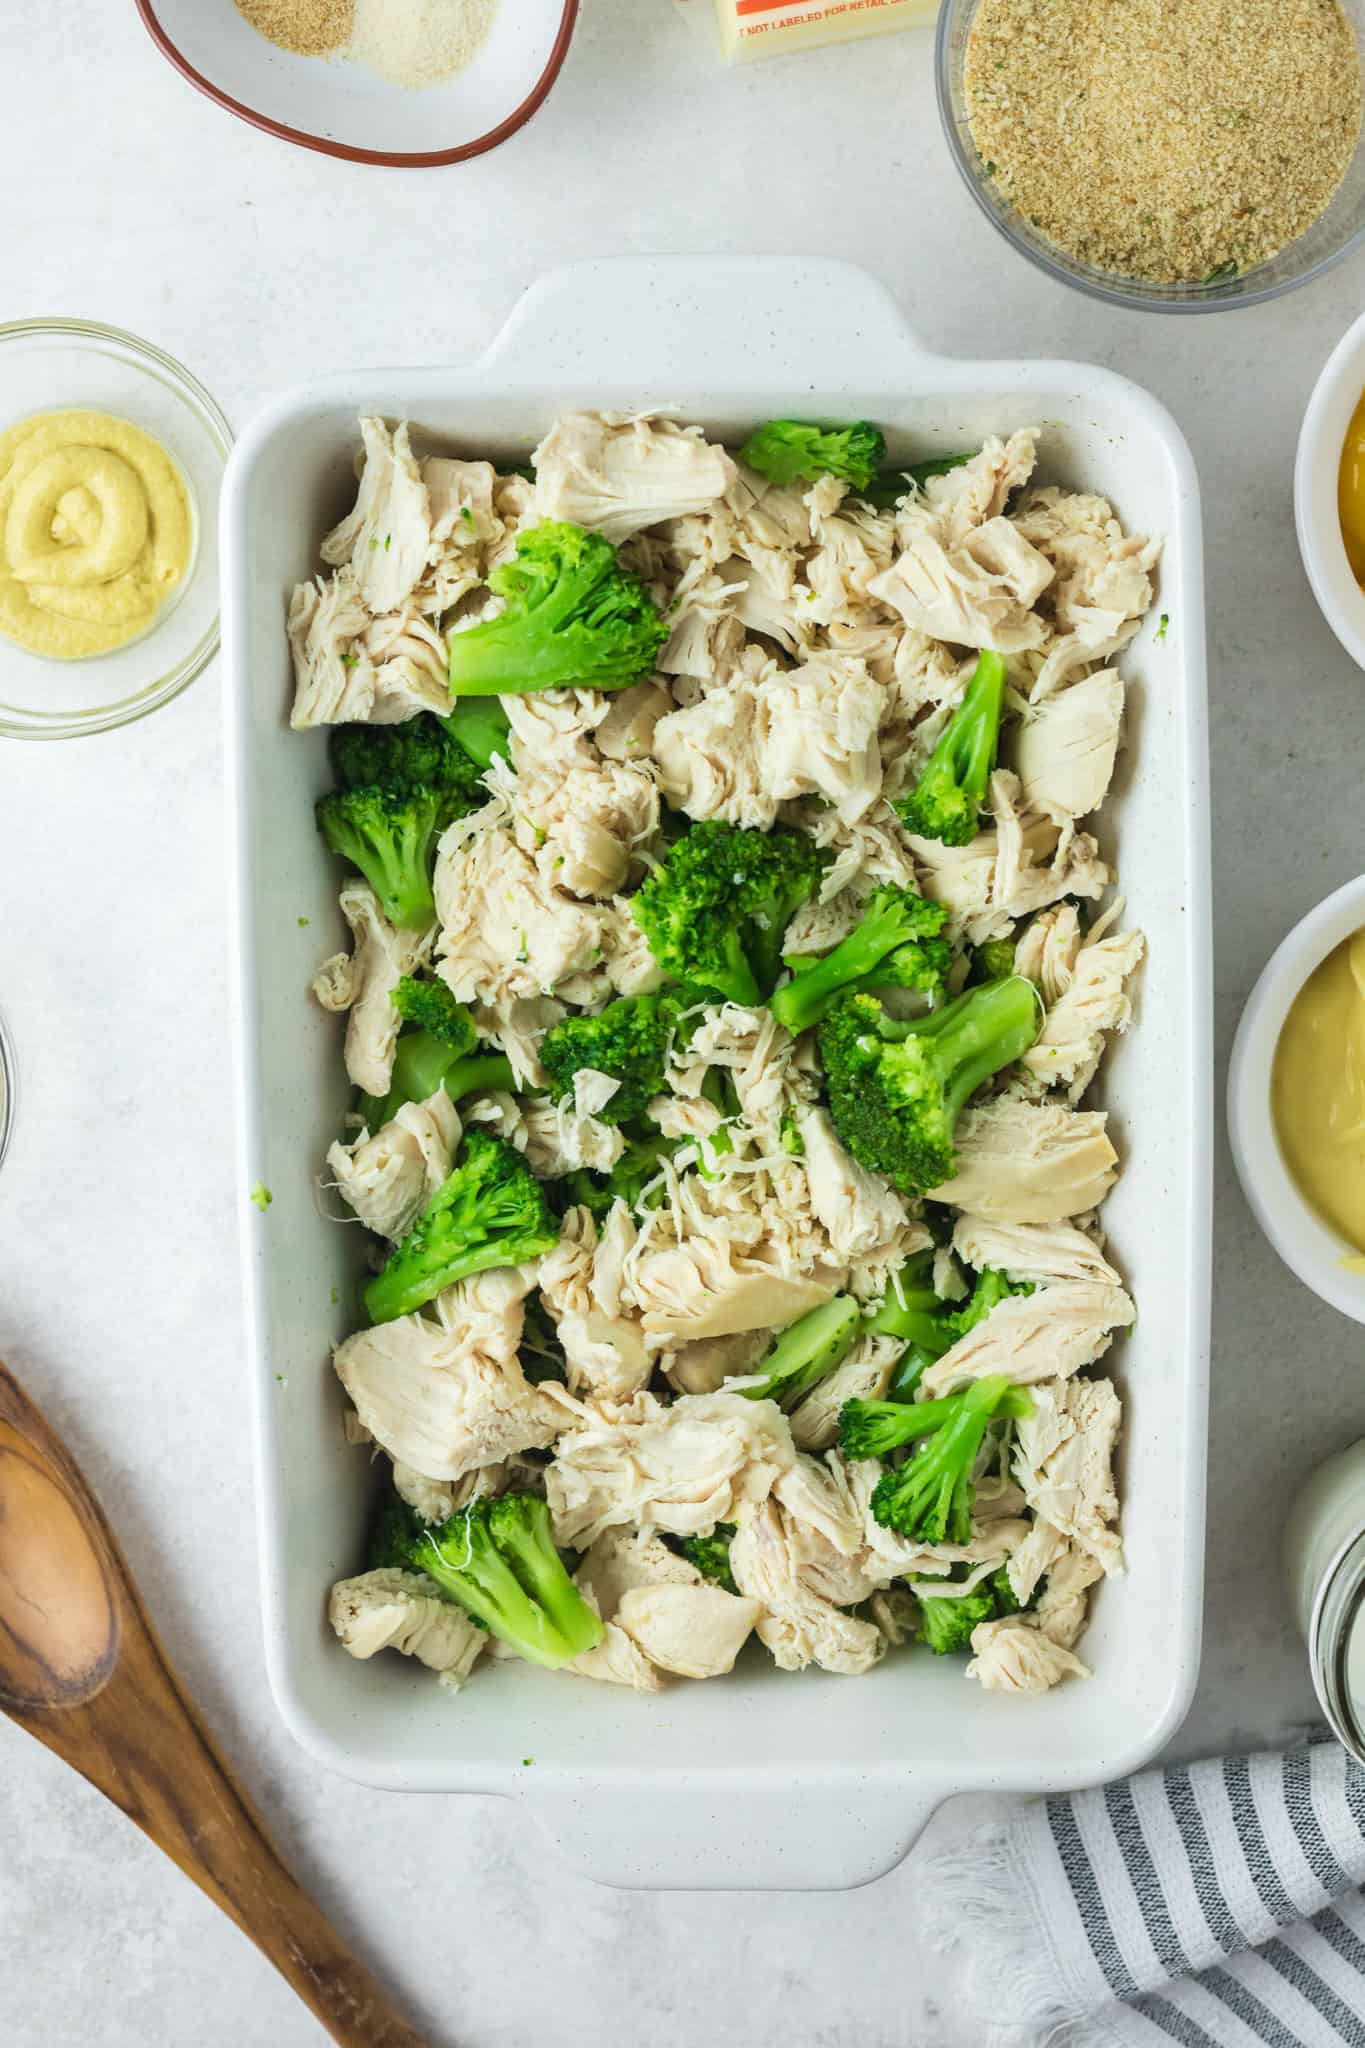 chopped chicken and broccoli florets in a baking dish